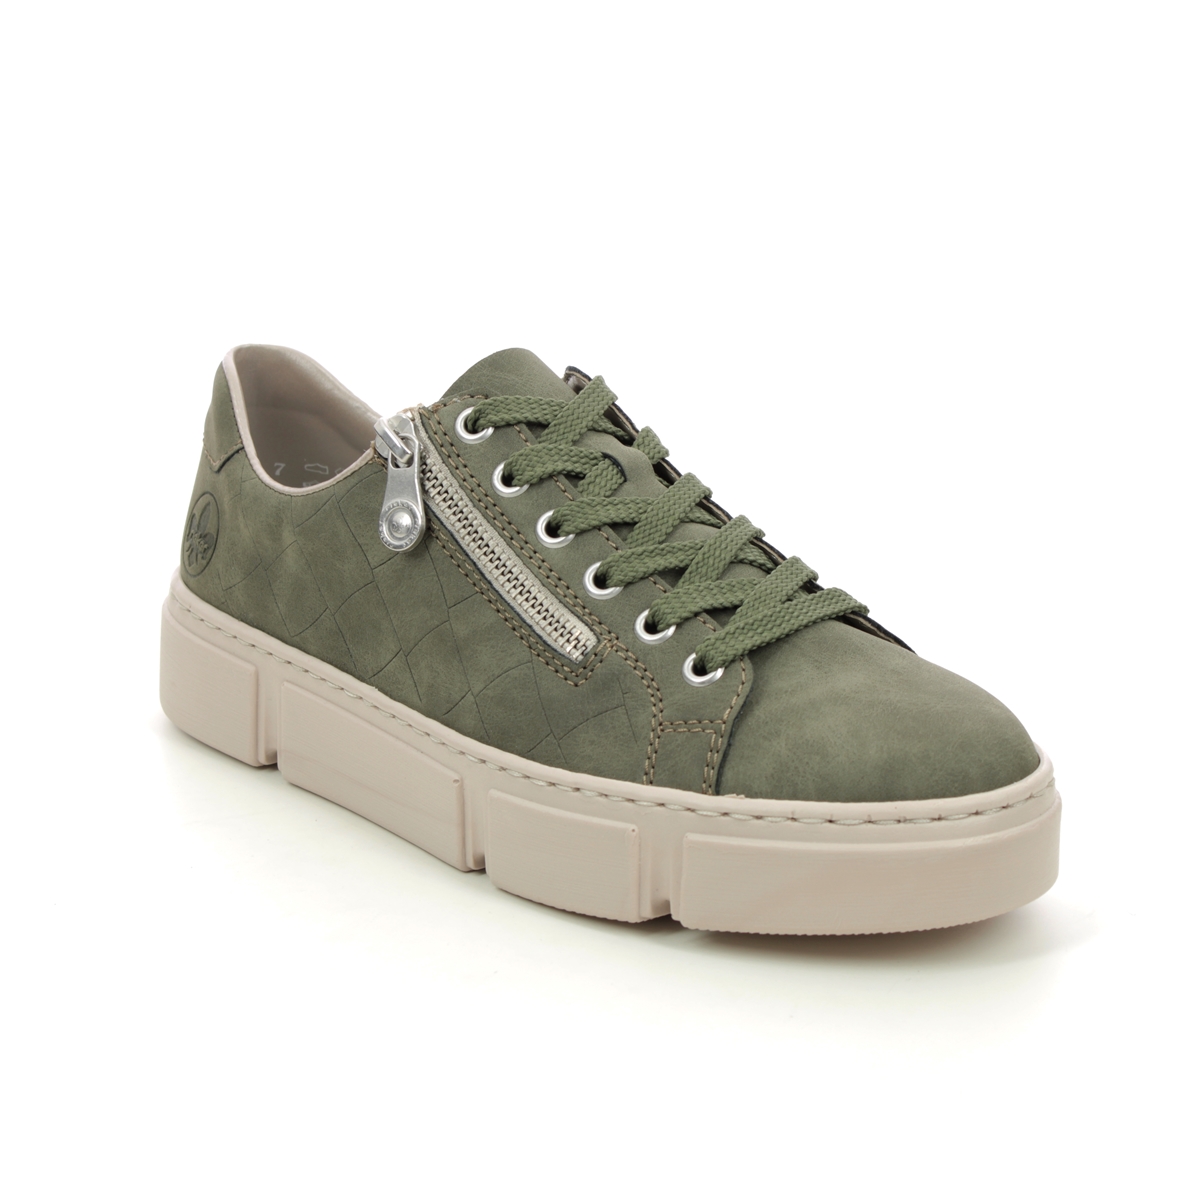 Rieker Hagenzi Olive Suede Womens Trainers N5935-54 In Size 37 In Plain Olive Suede